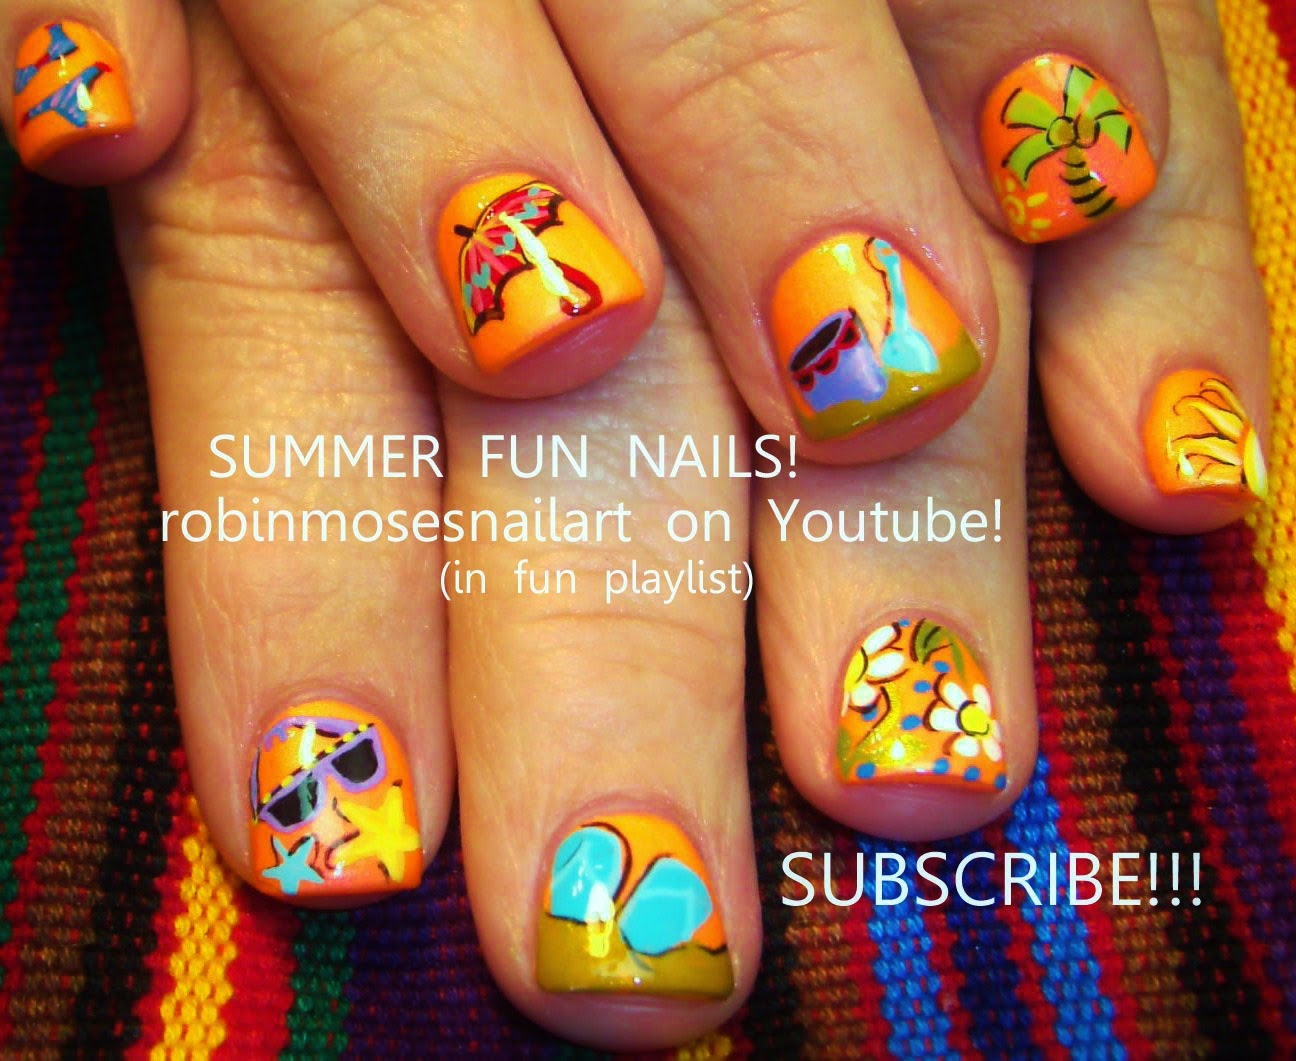 7. Floral Nail Designs - wide 5